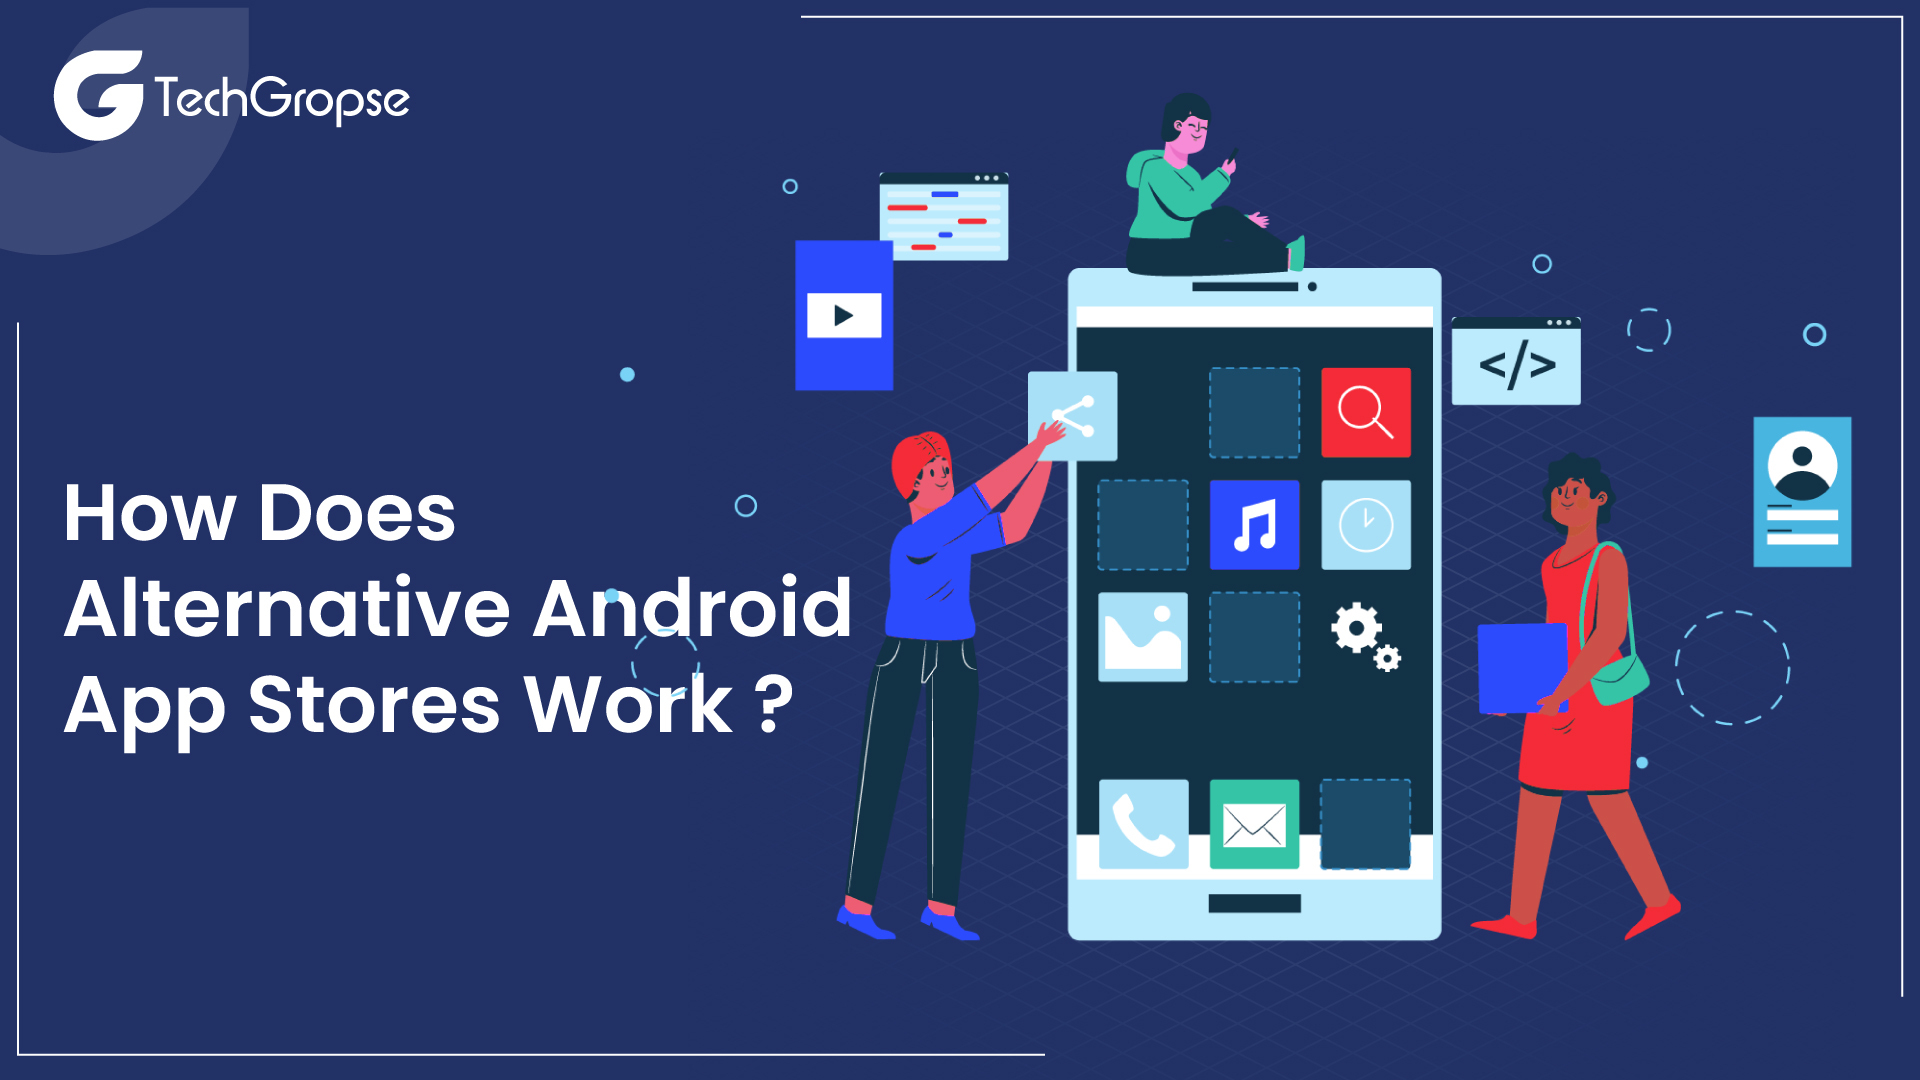 How Does Alternative Android App Stores Work?